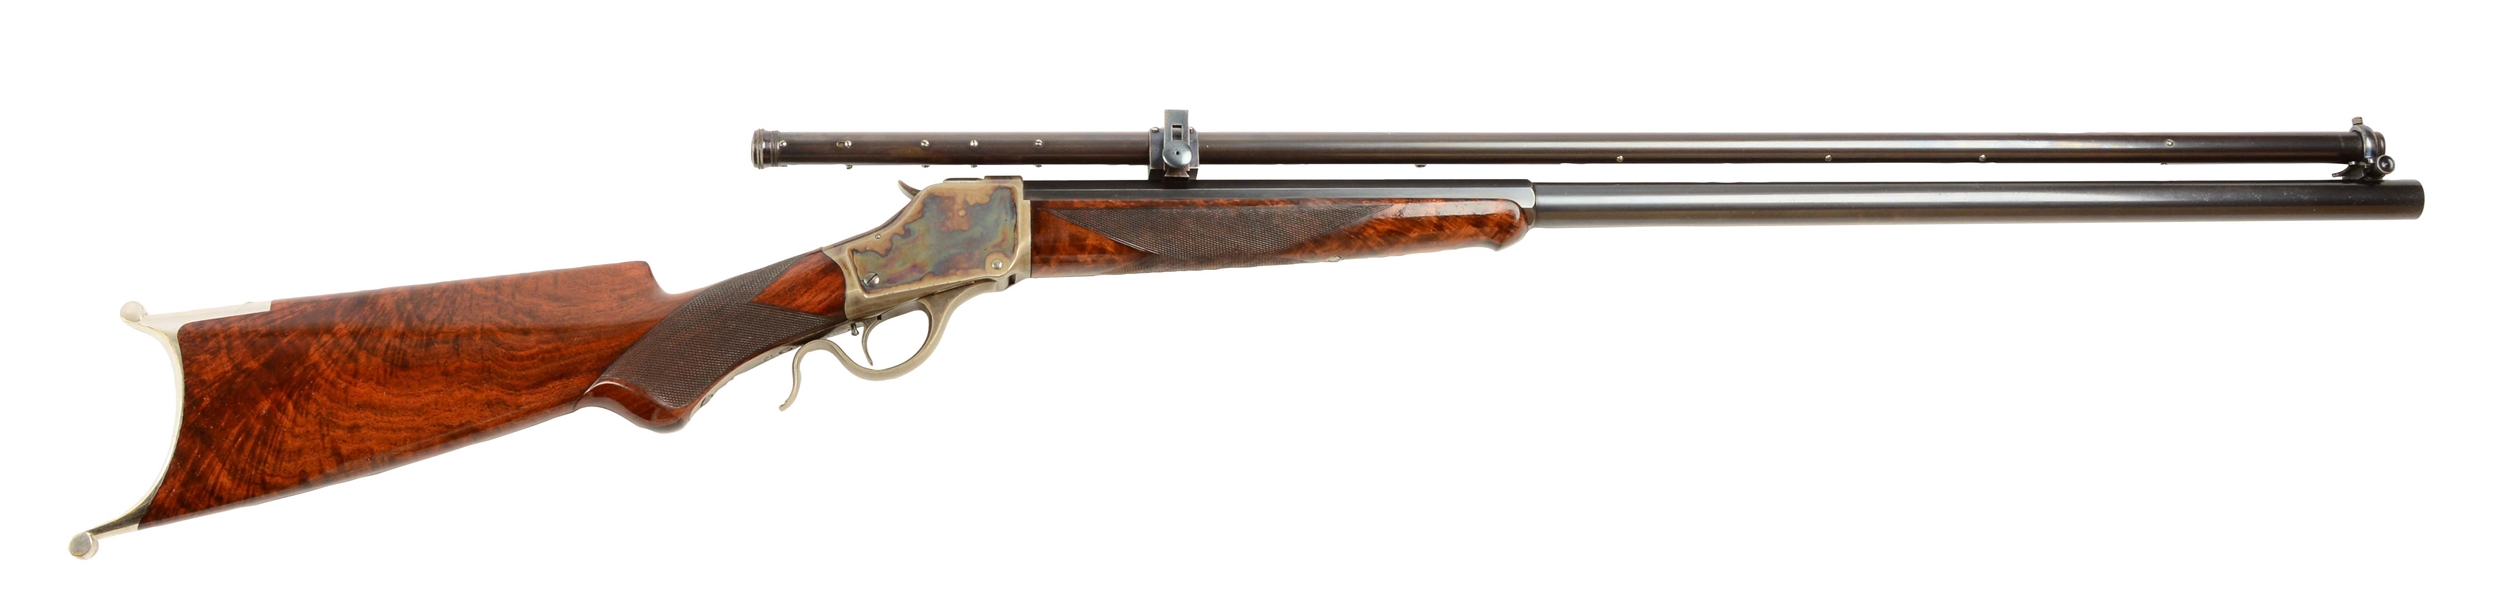 (A) NEAR MINT WINCHESTER MODEL 1885 HIGH WALL DELUXE SINGLE SHOT RIFLE.